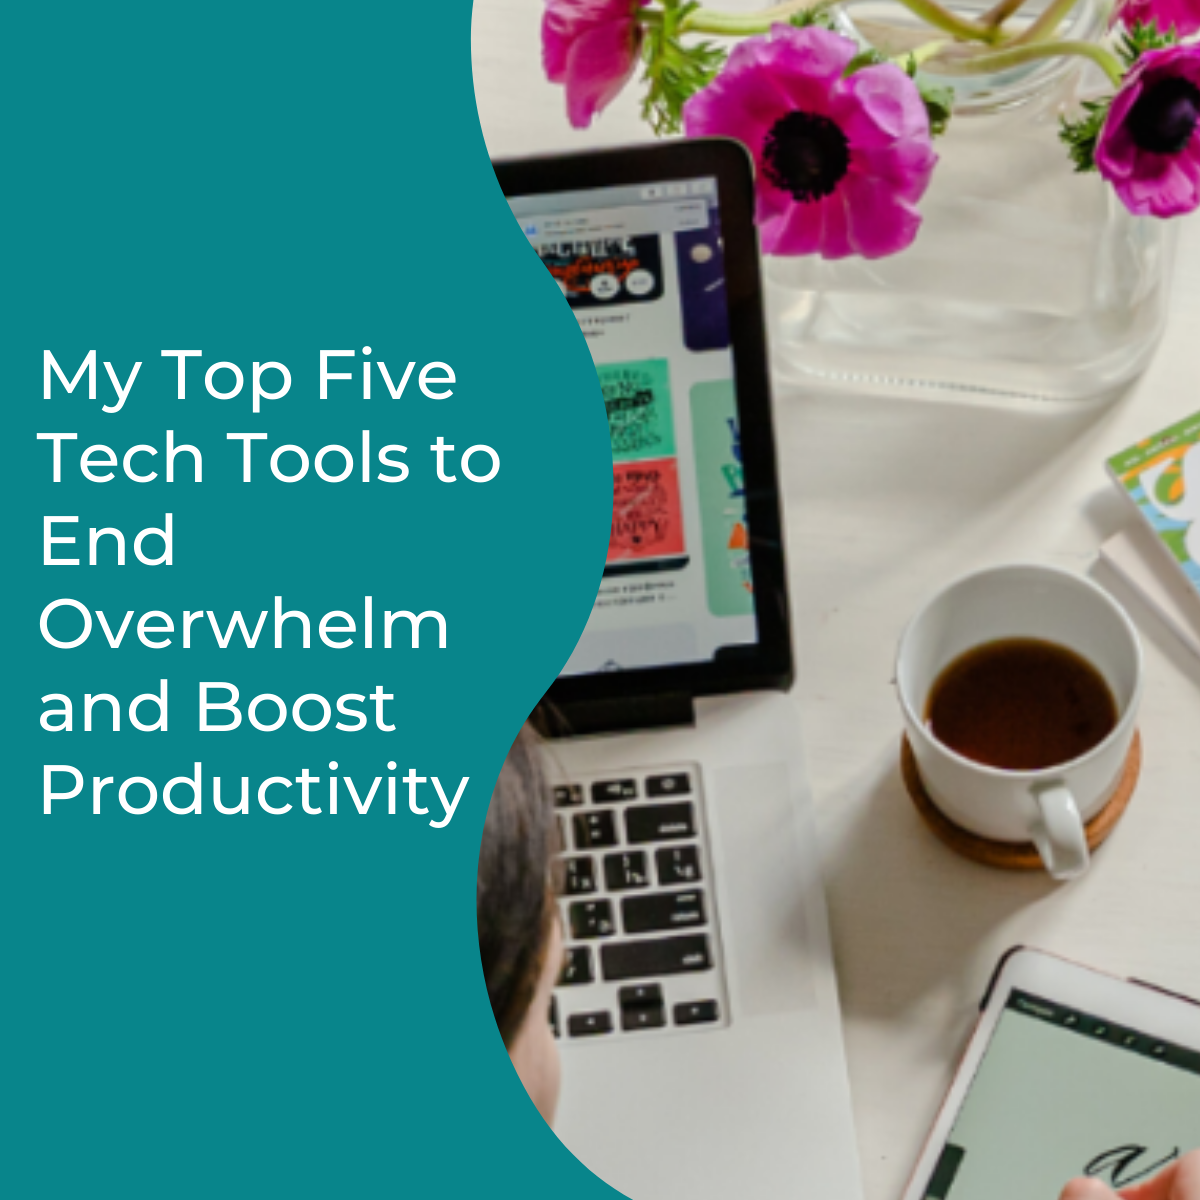 You are currently viewing My Top Five Tech Tools to End Overwhelm and Boost Productivity